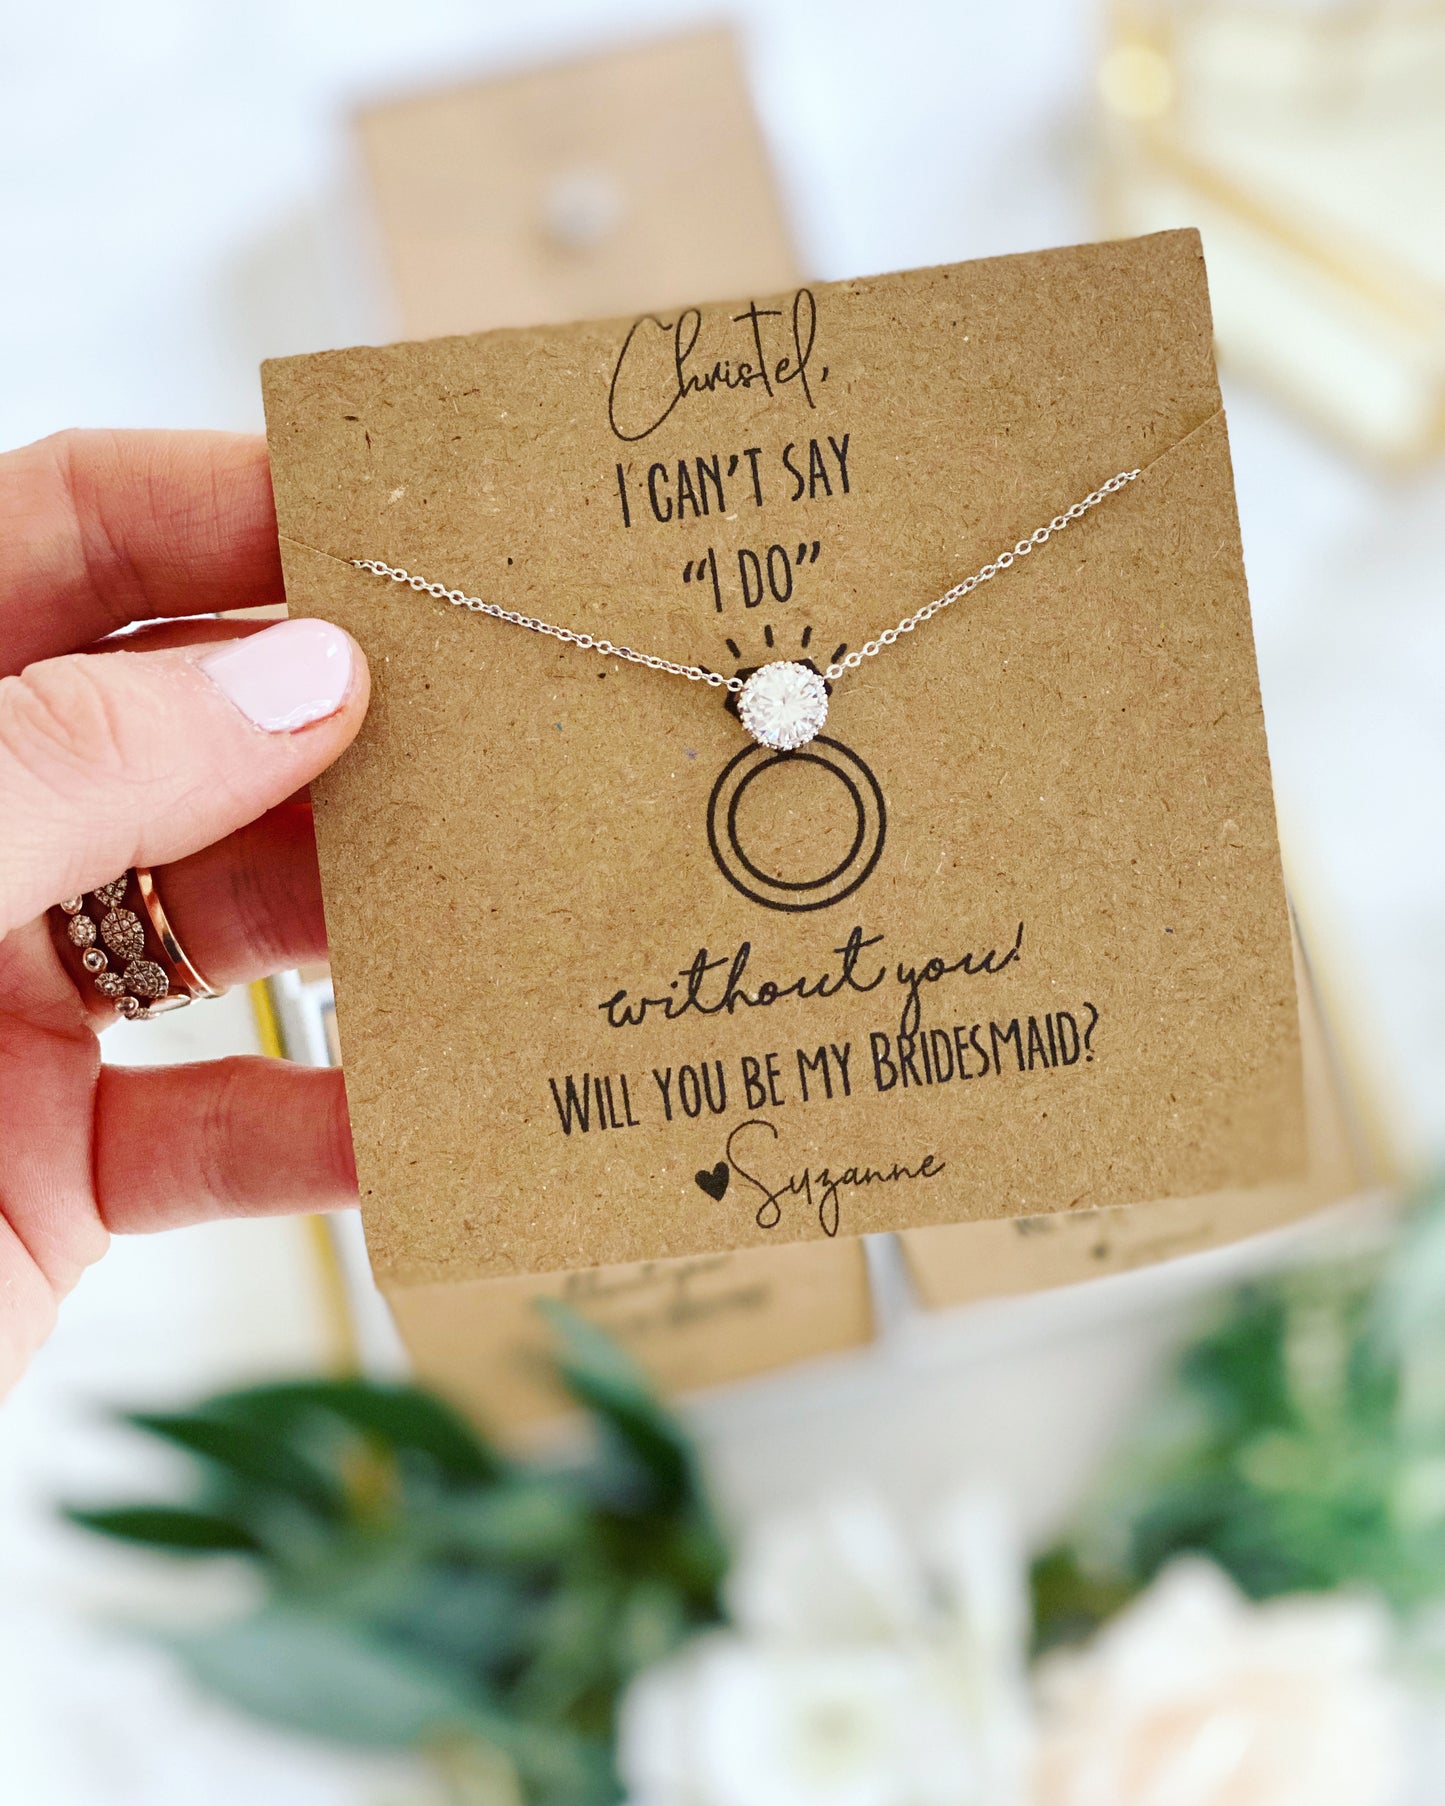 Can't Say "I Do" Dainty CZ Stone Necklace